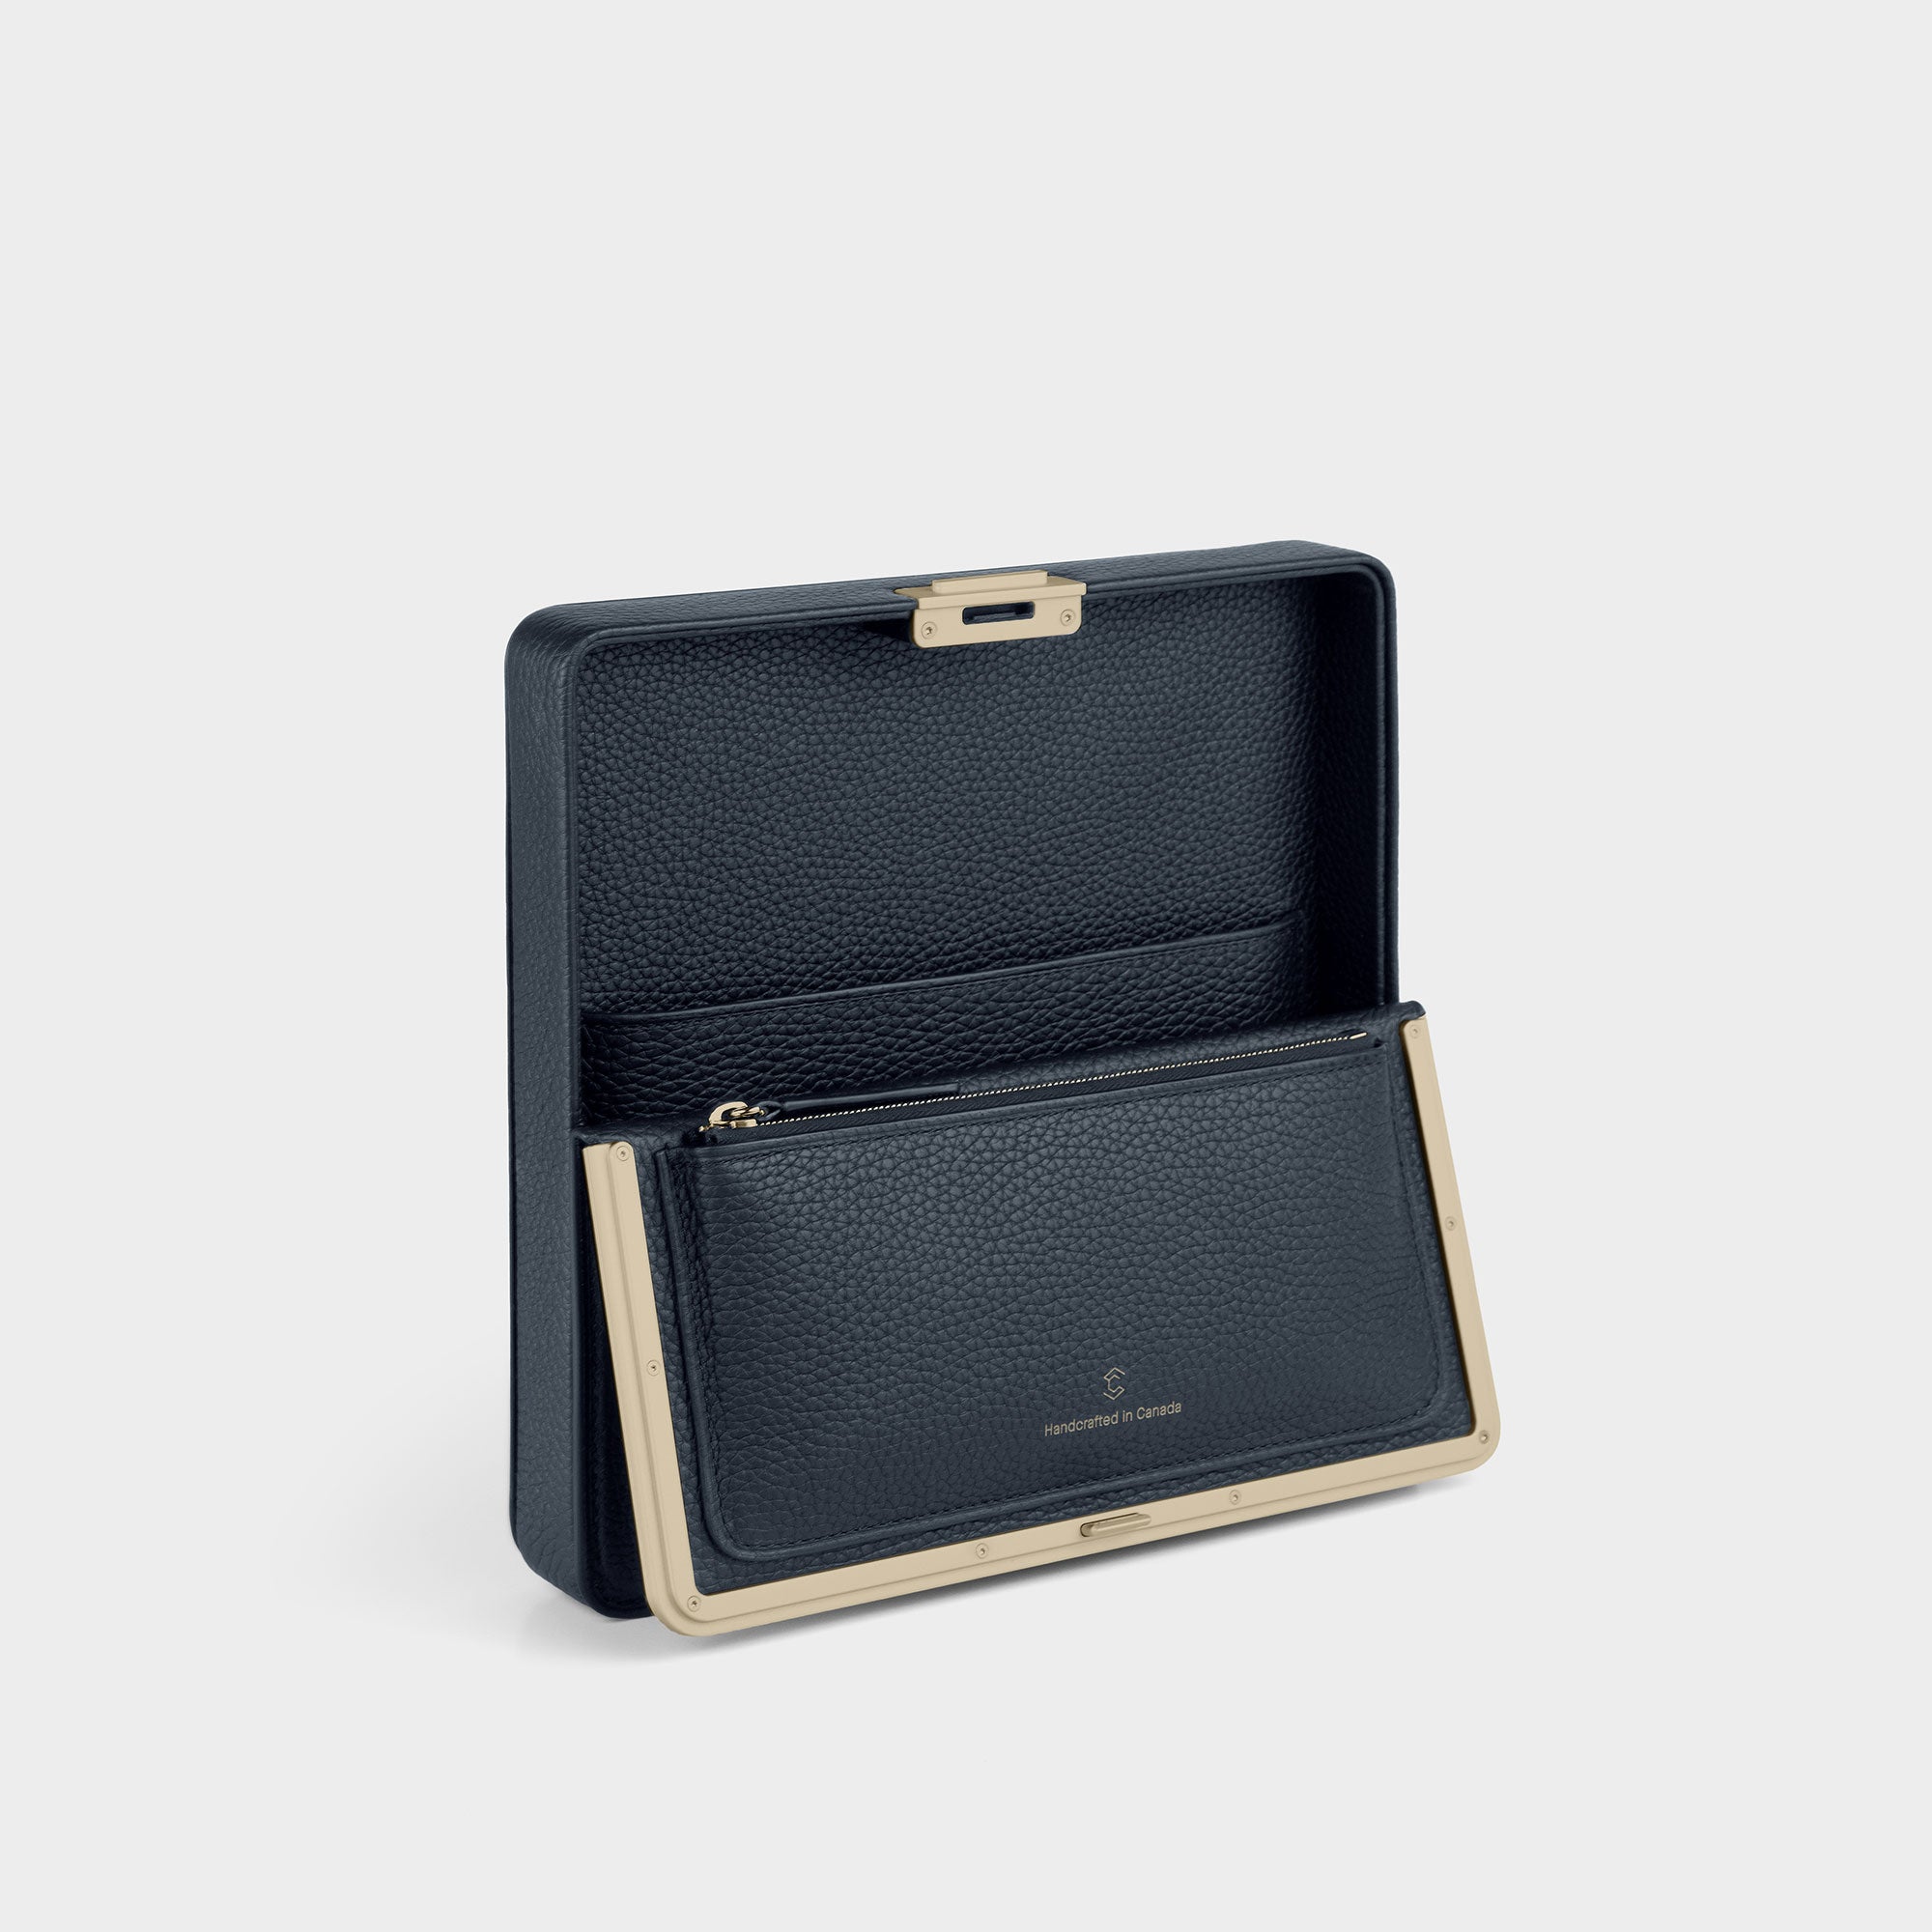 Product photo of open Fraser designer travel wallet in gold and marine leather